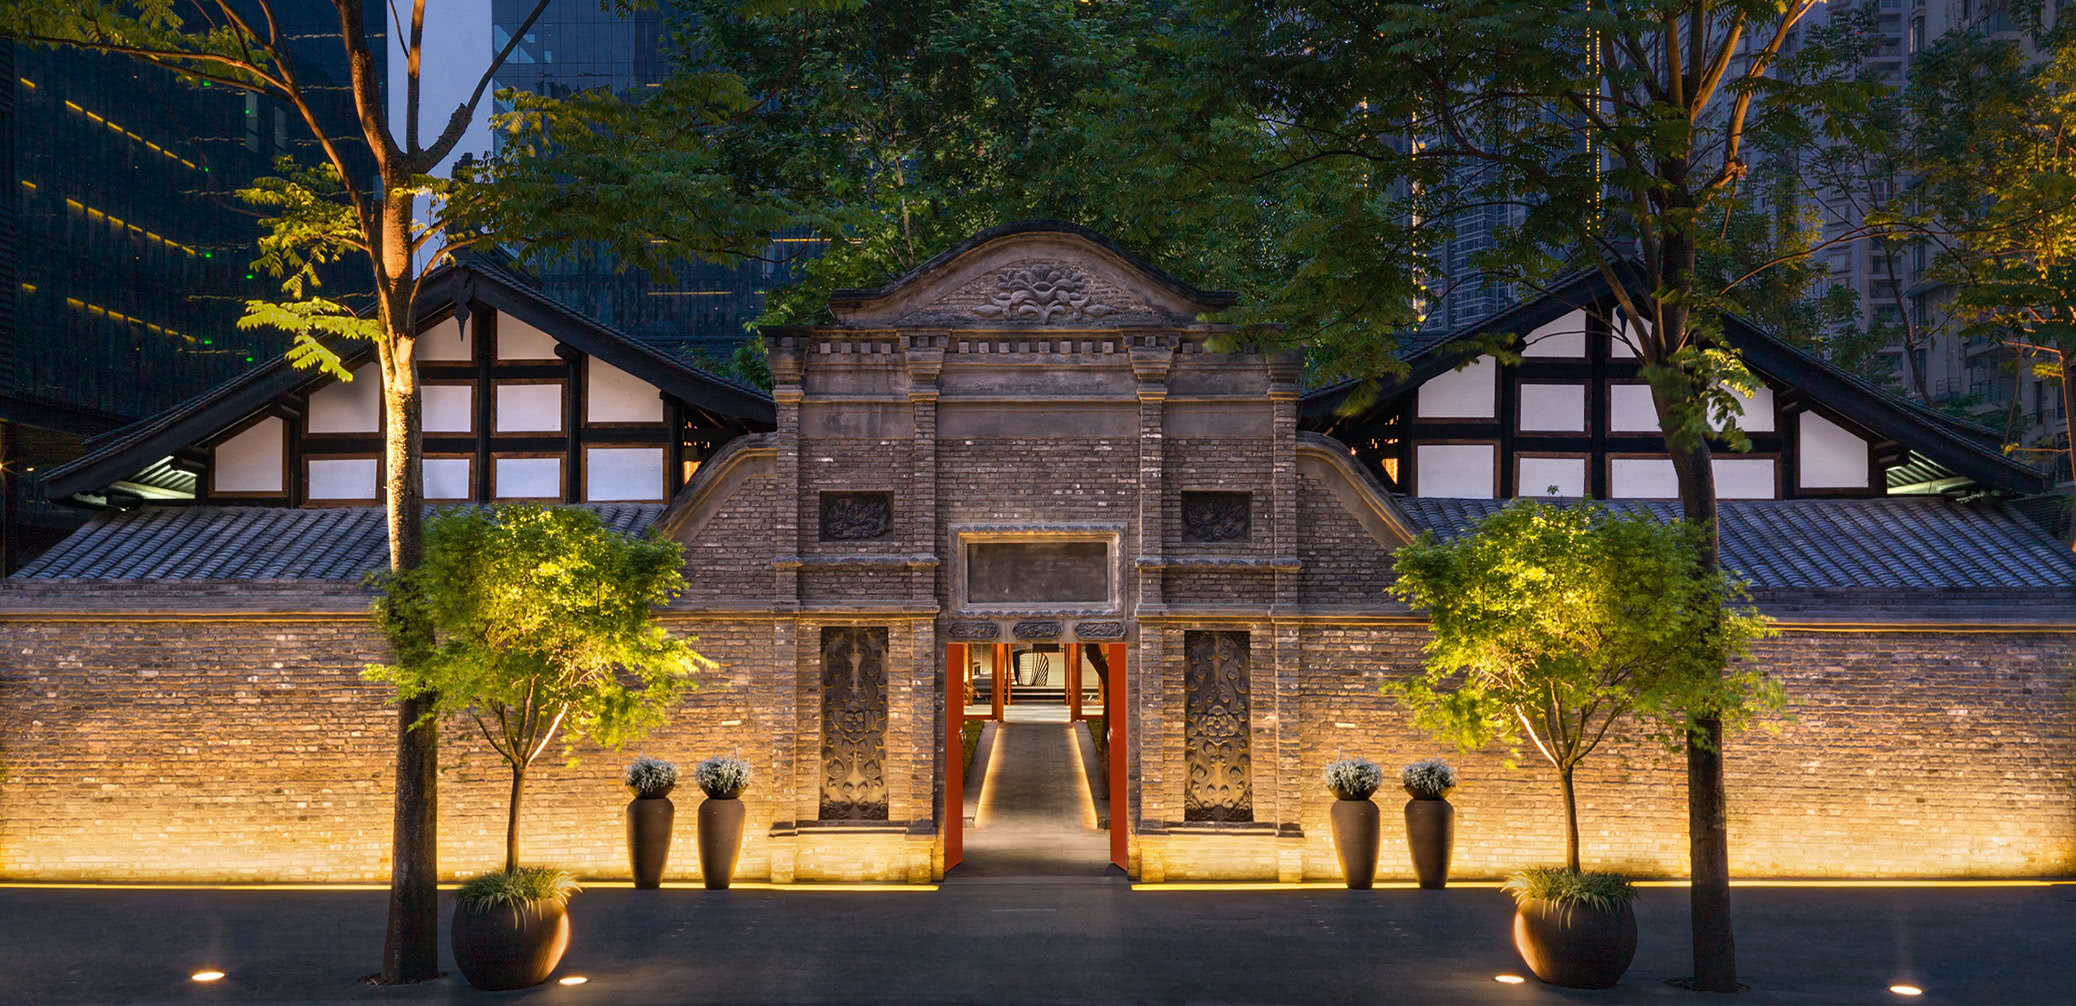 Is There A Four Seasons Hotel In Chengdu?